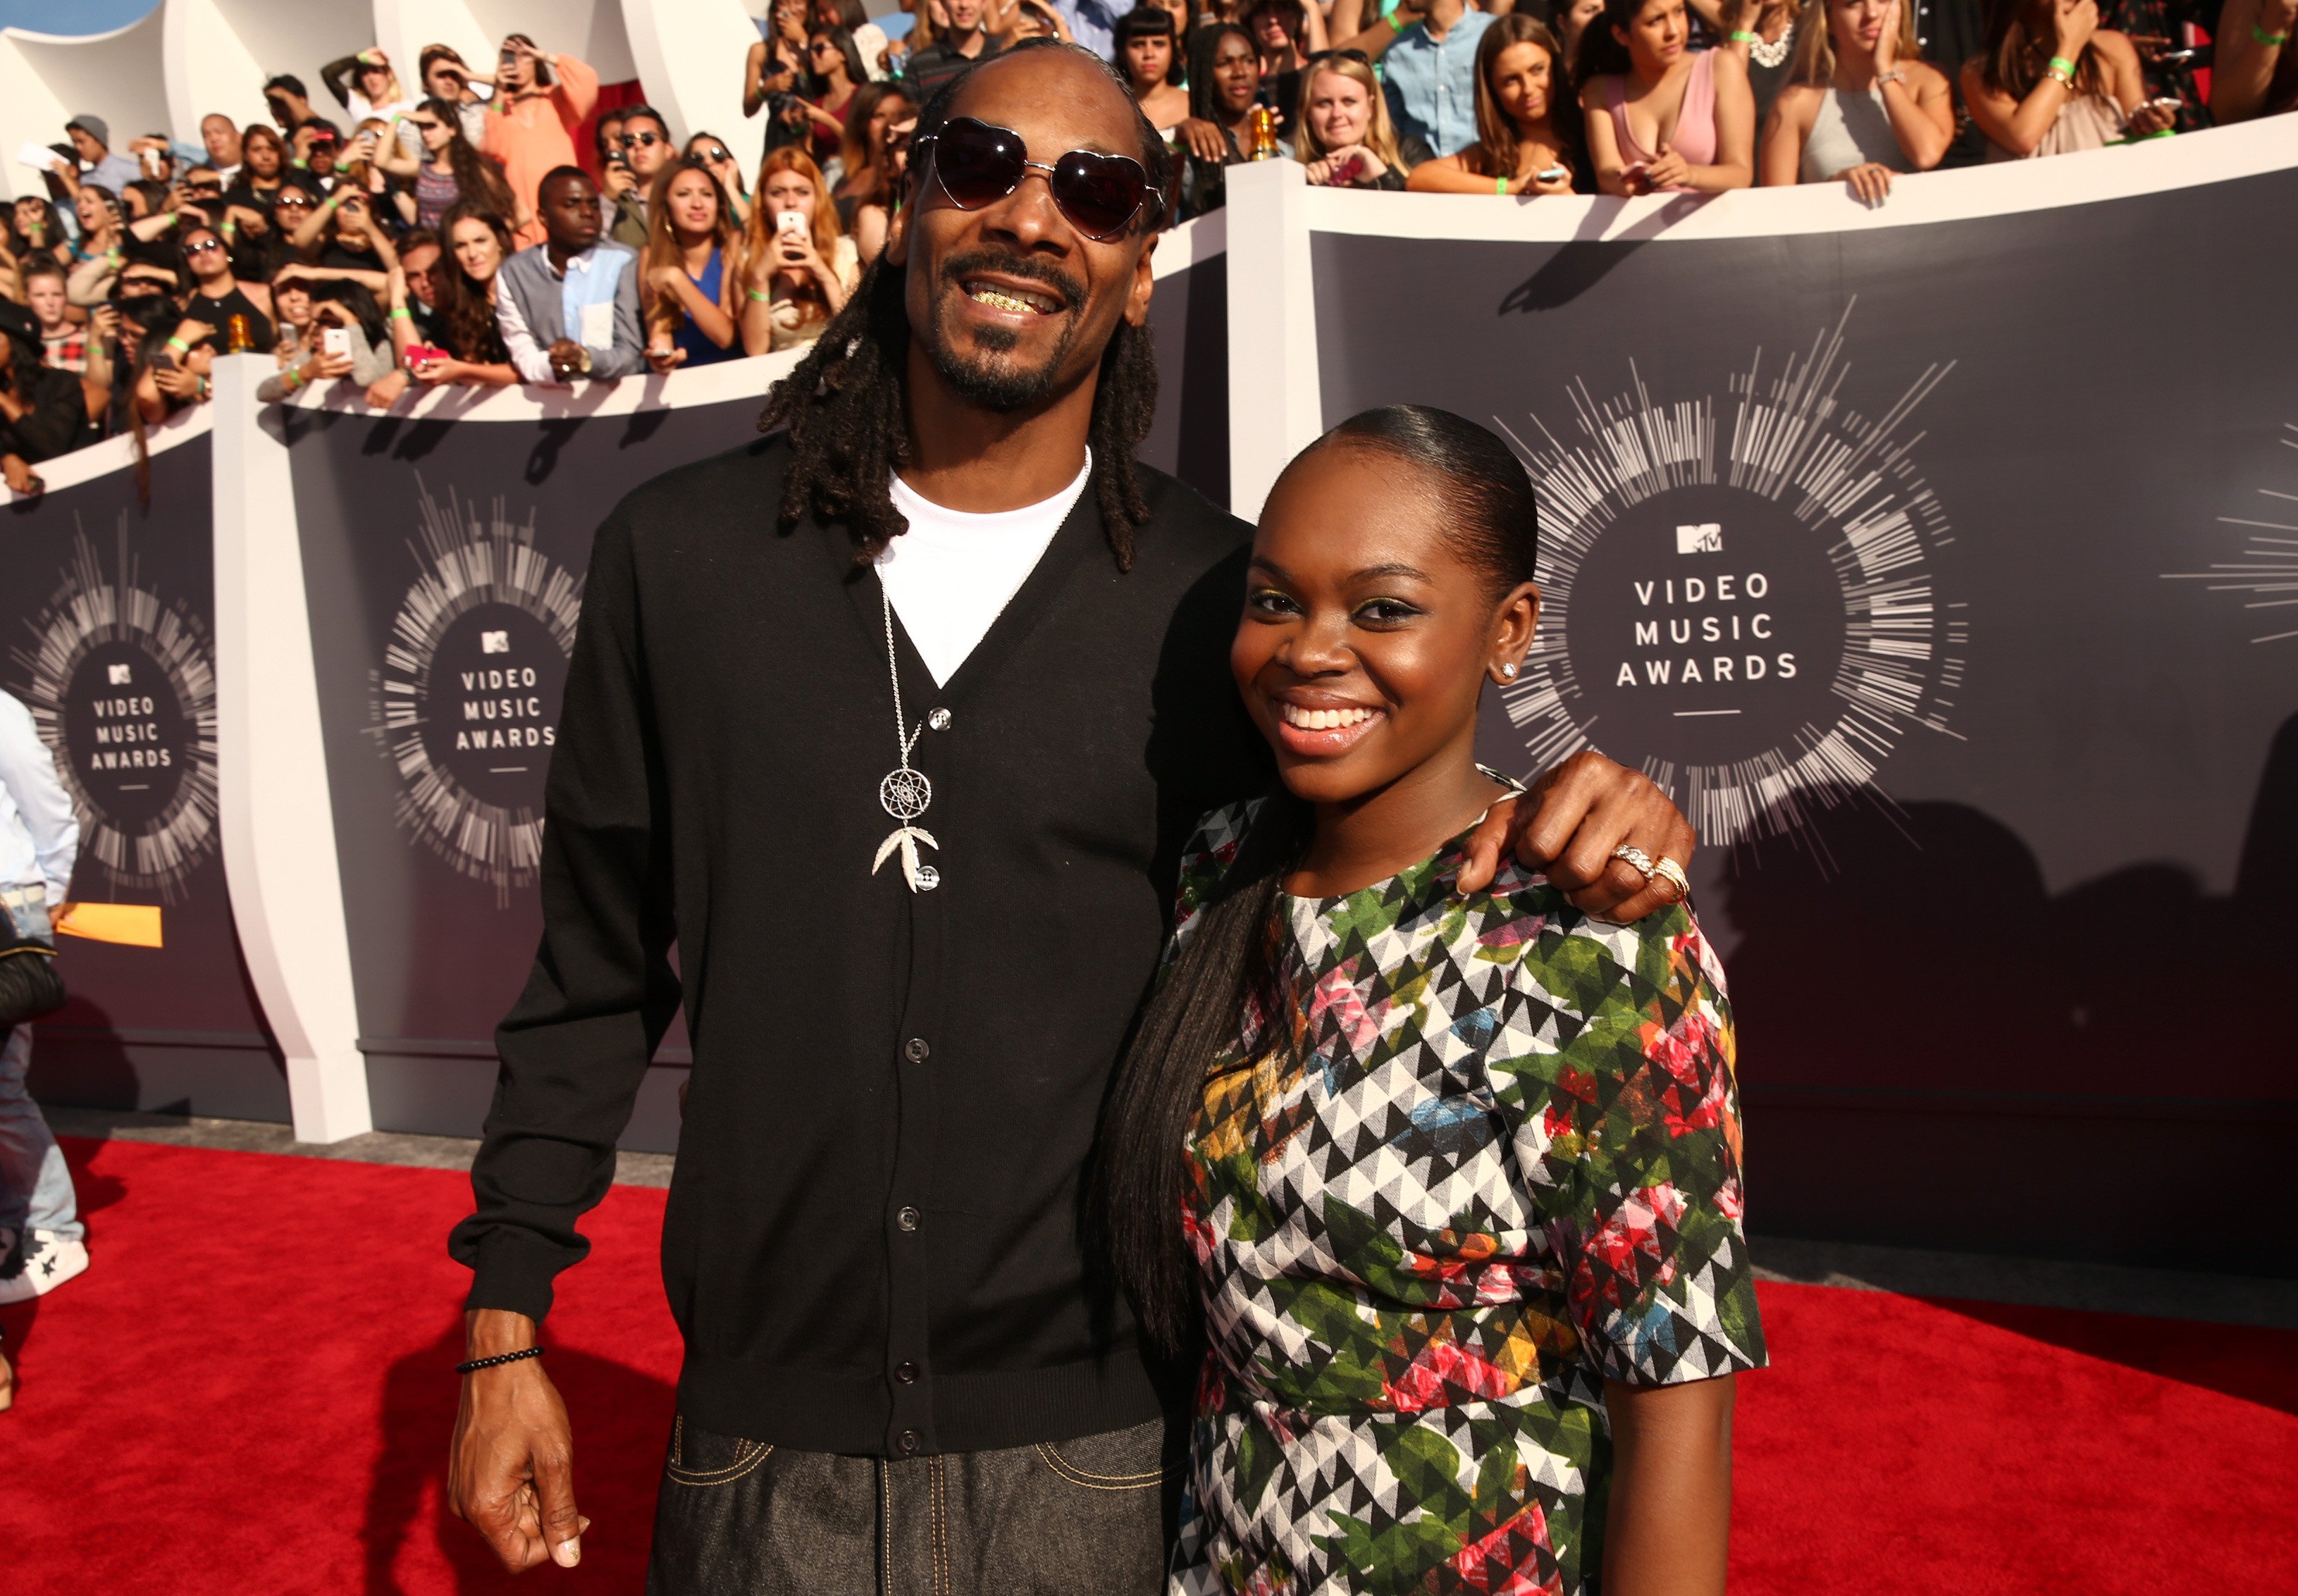 Snoop Dogg and Cori Broadus attend the 2014 MTV Video Music Awards on August 24, 2014, in Inglewood, California. | Source: Getty Images